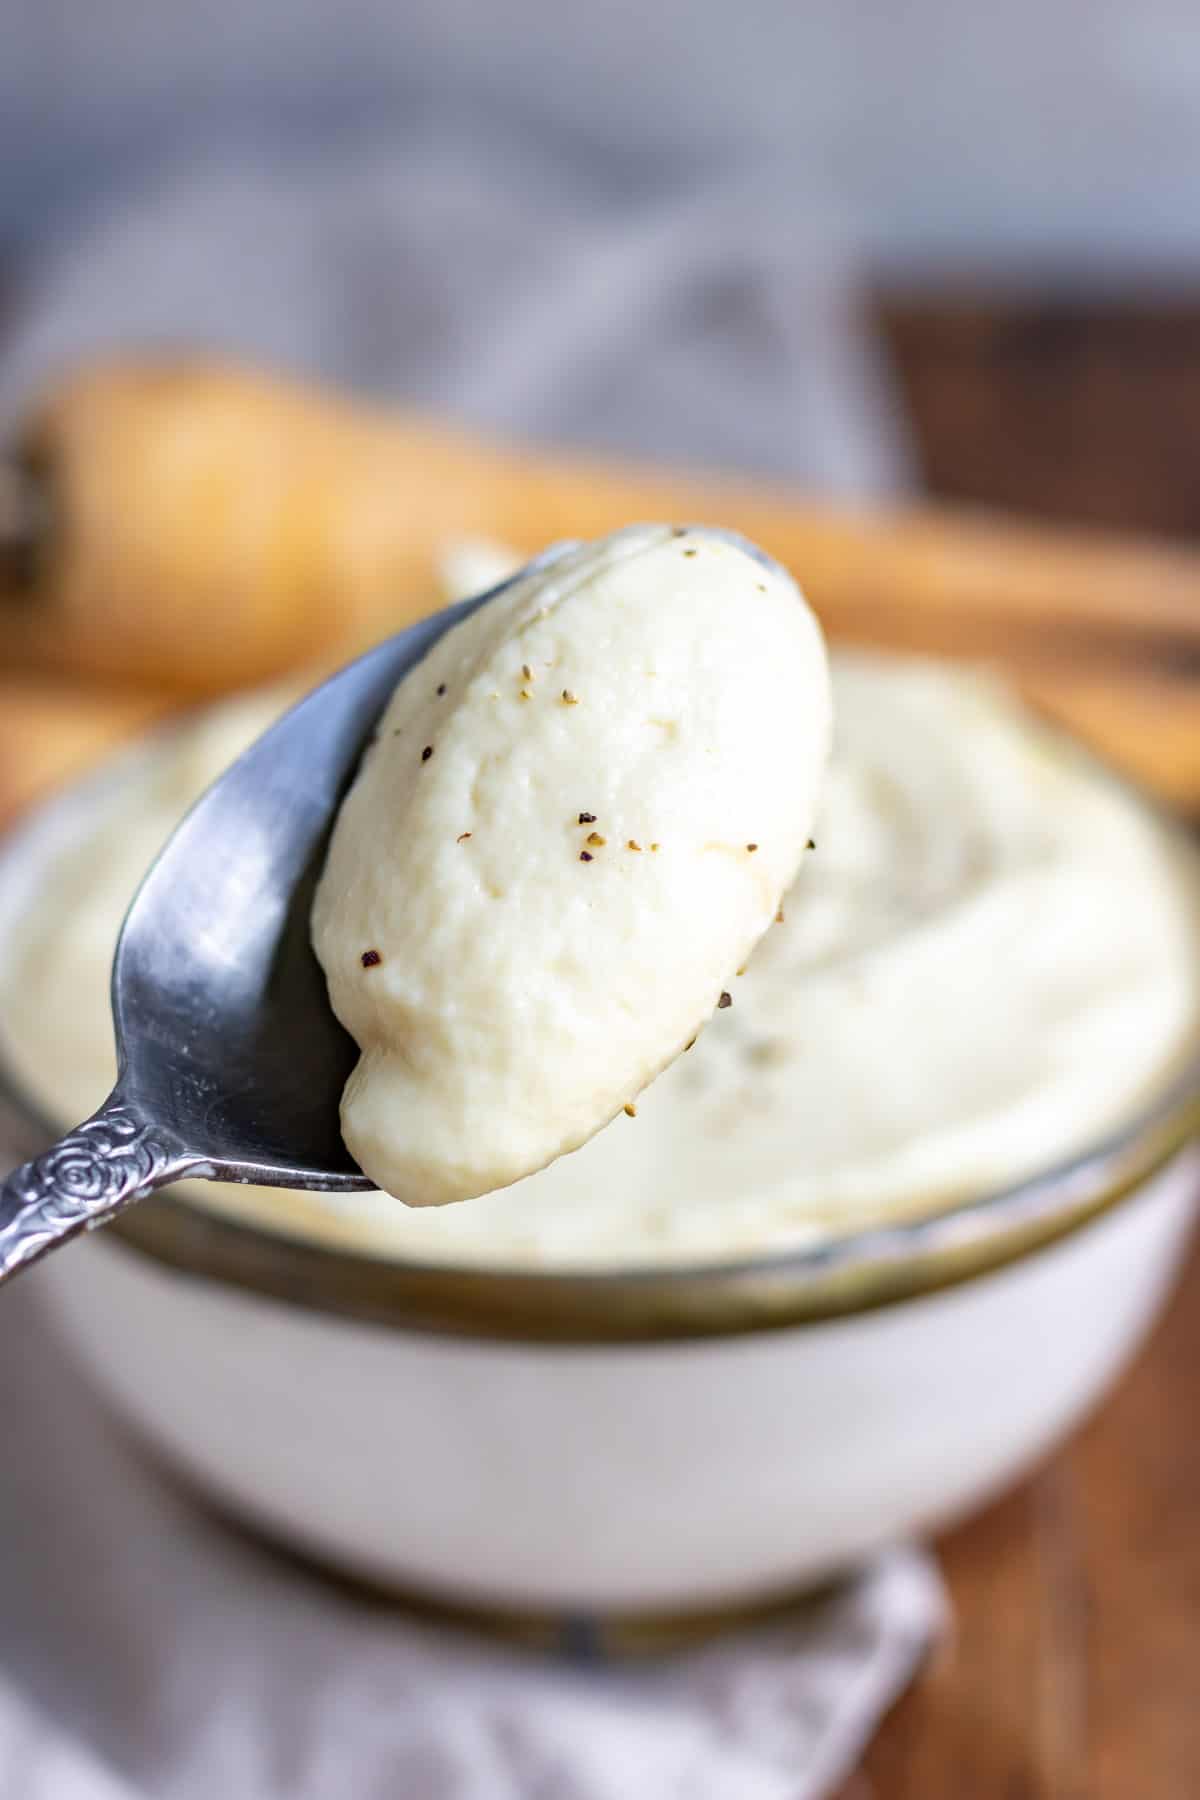 A spoonful of parsnip puree.